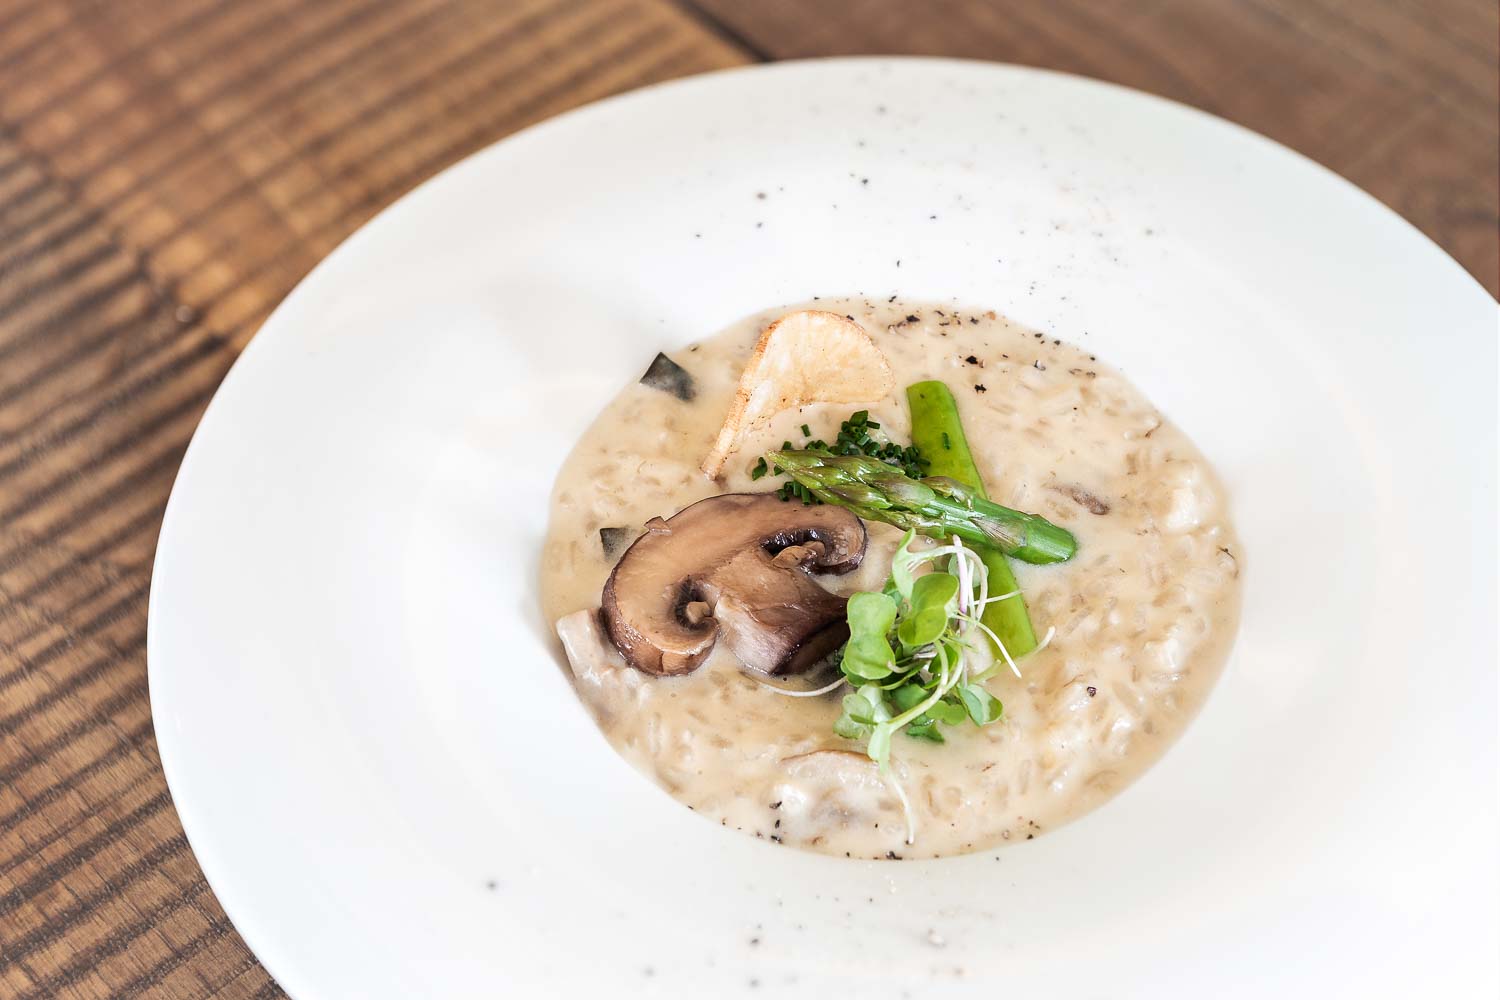 Risotto of Idiazabal cheese and mushrooms